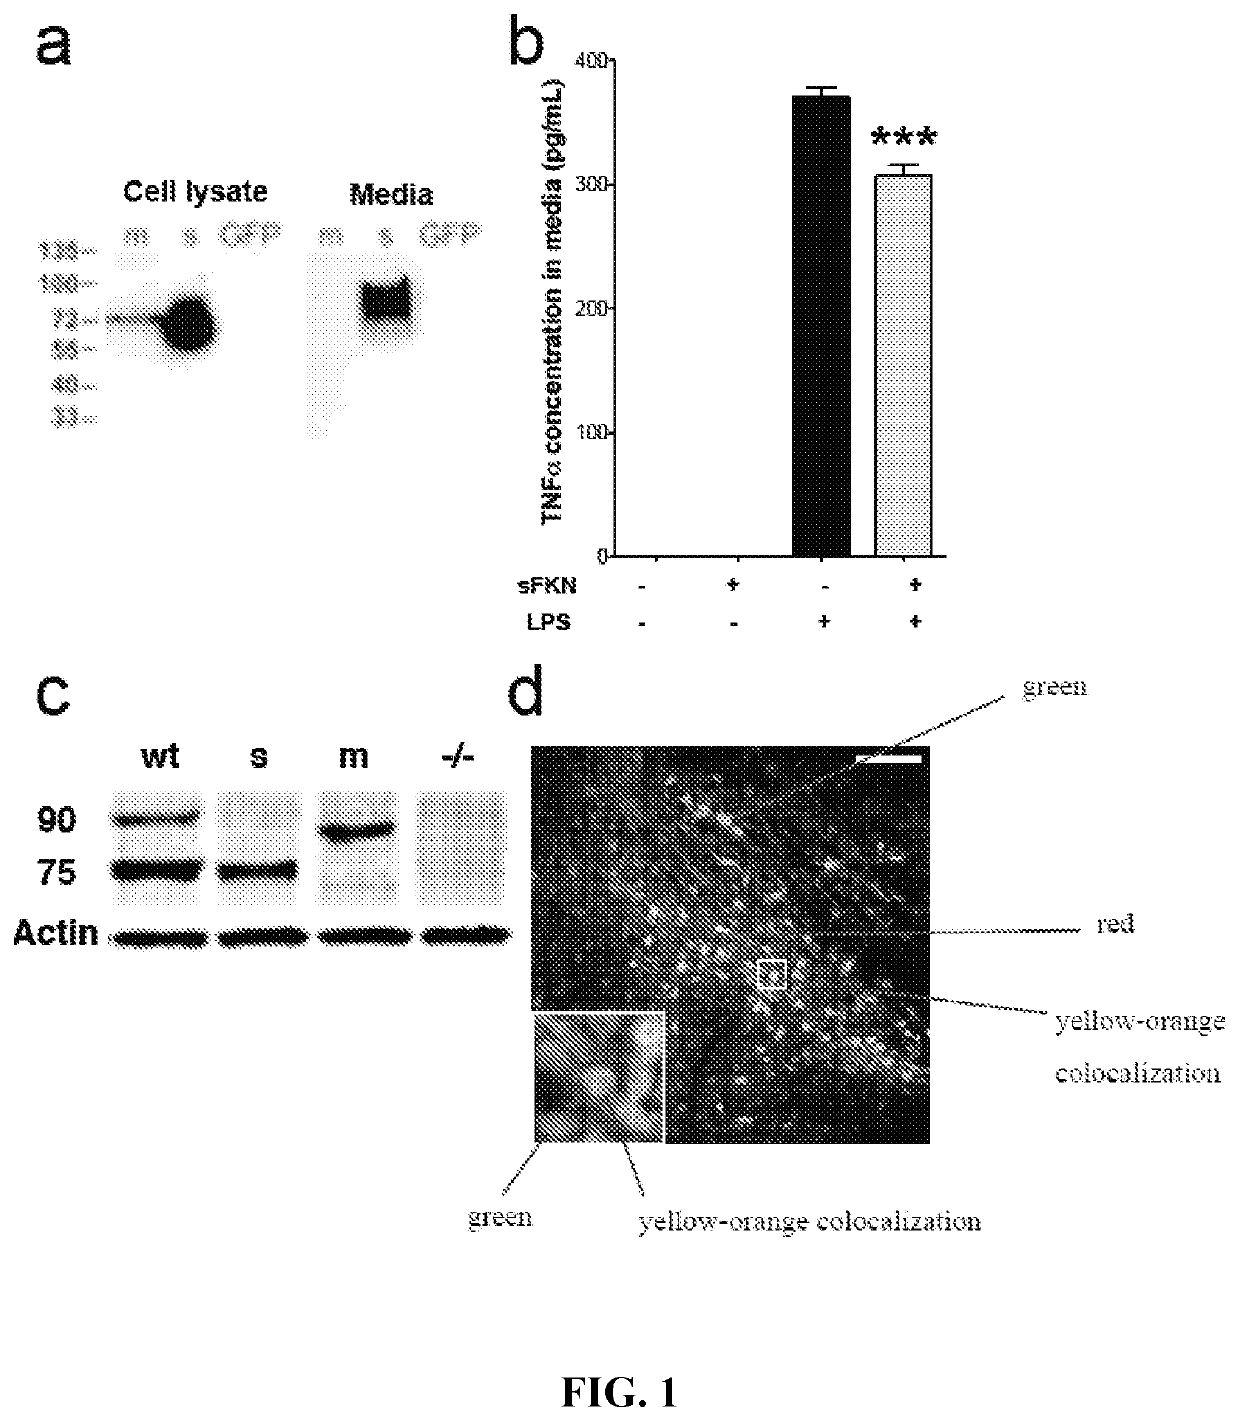 Recombinant adeno-associated virus-mediated expression of fractalkine for treatment of neuroinflammatory and neurodegenerative diseases